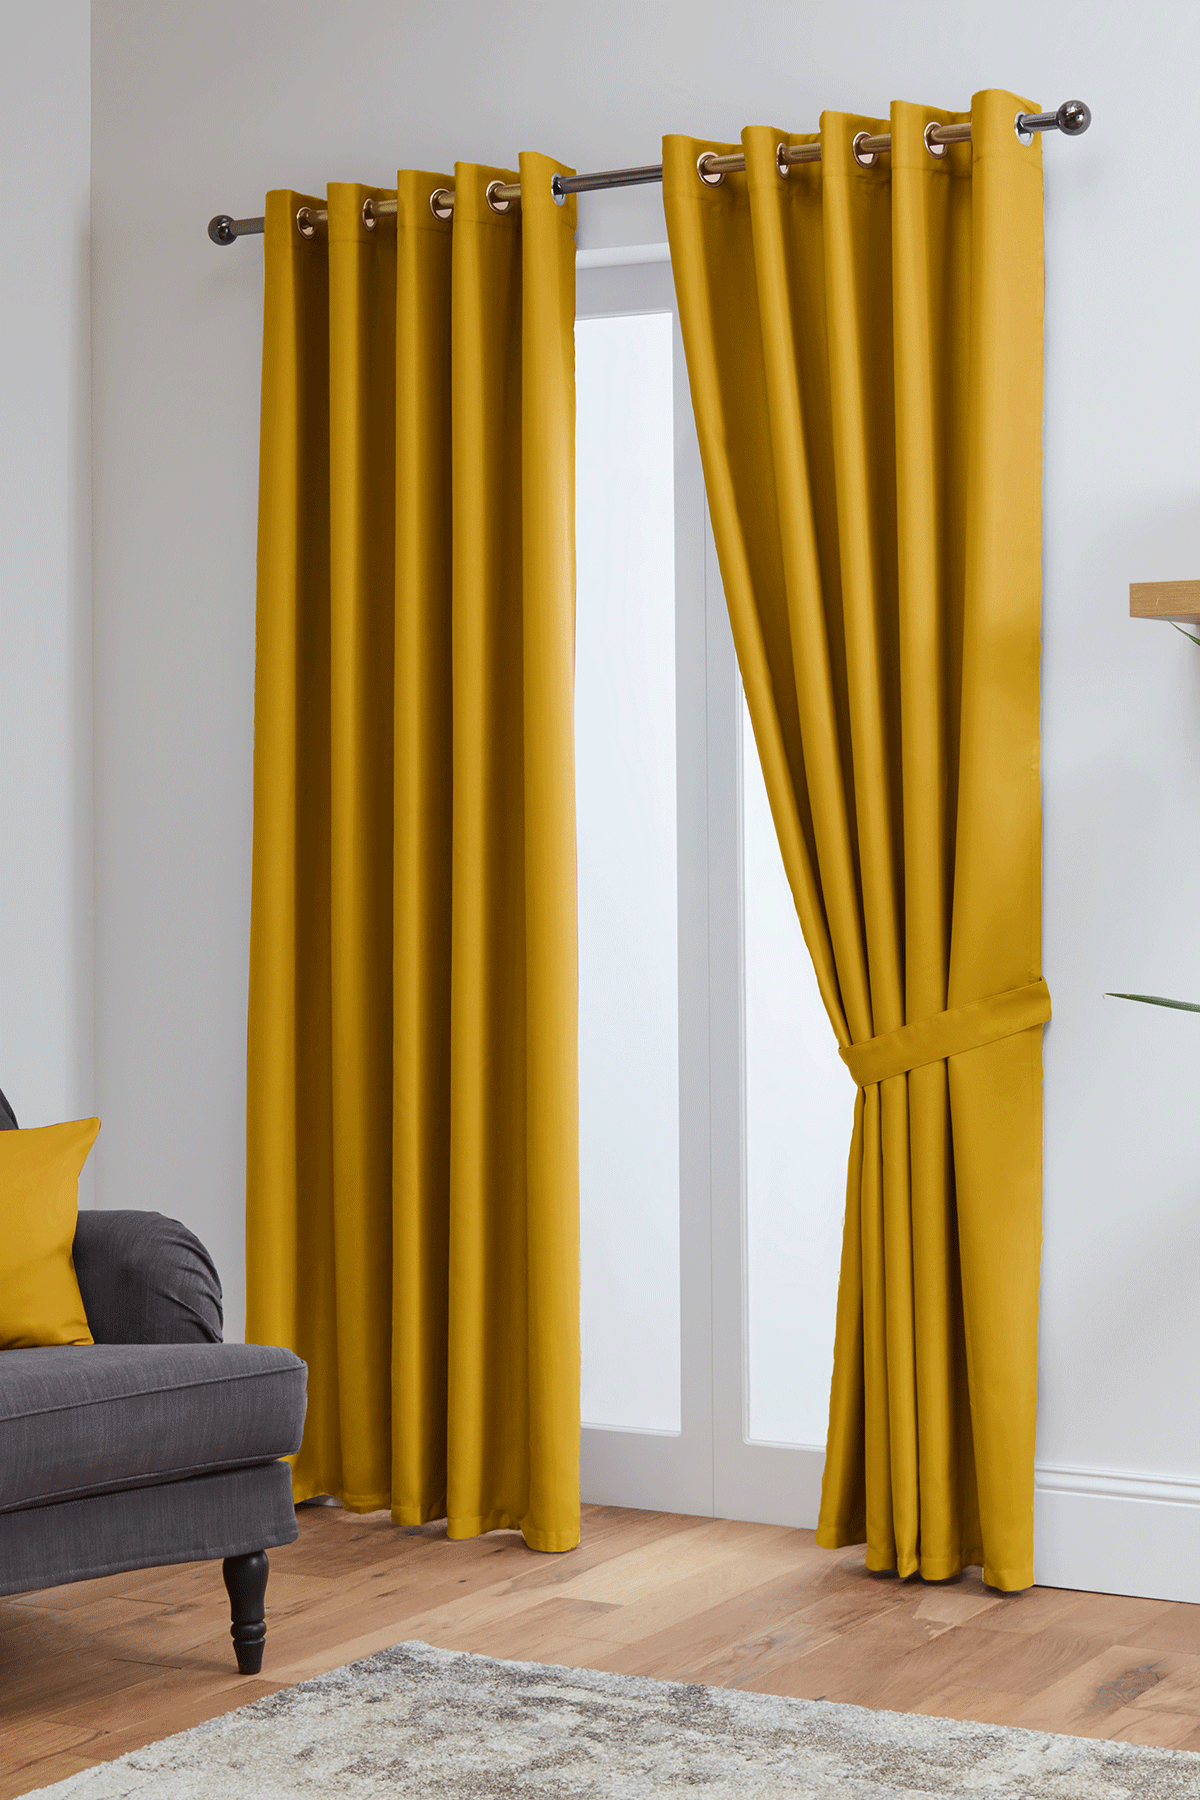 Thermal Blackout Ready Made Eyelet Curtains + Tie Backs (Ochre)